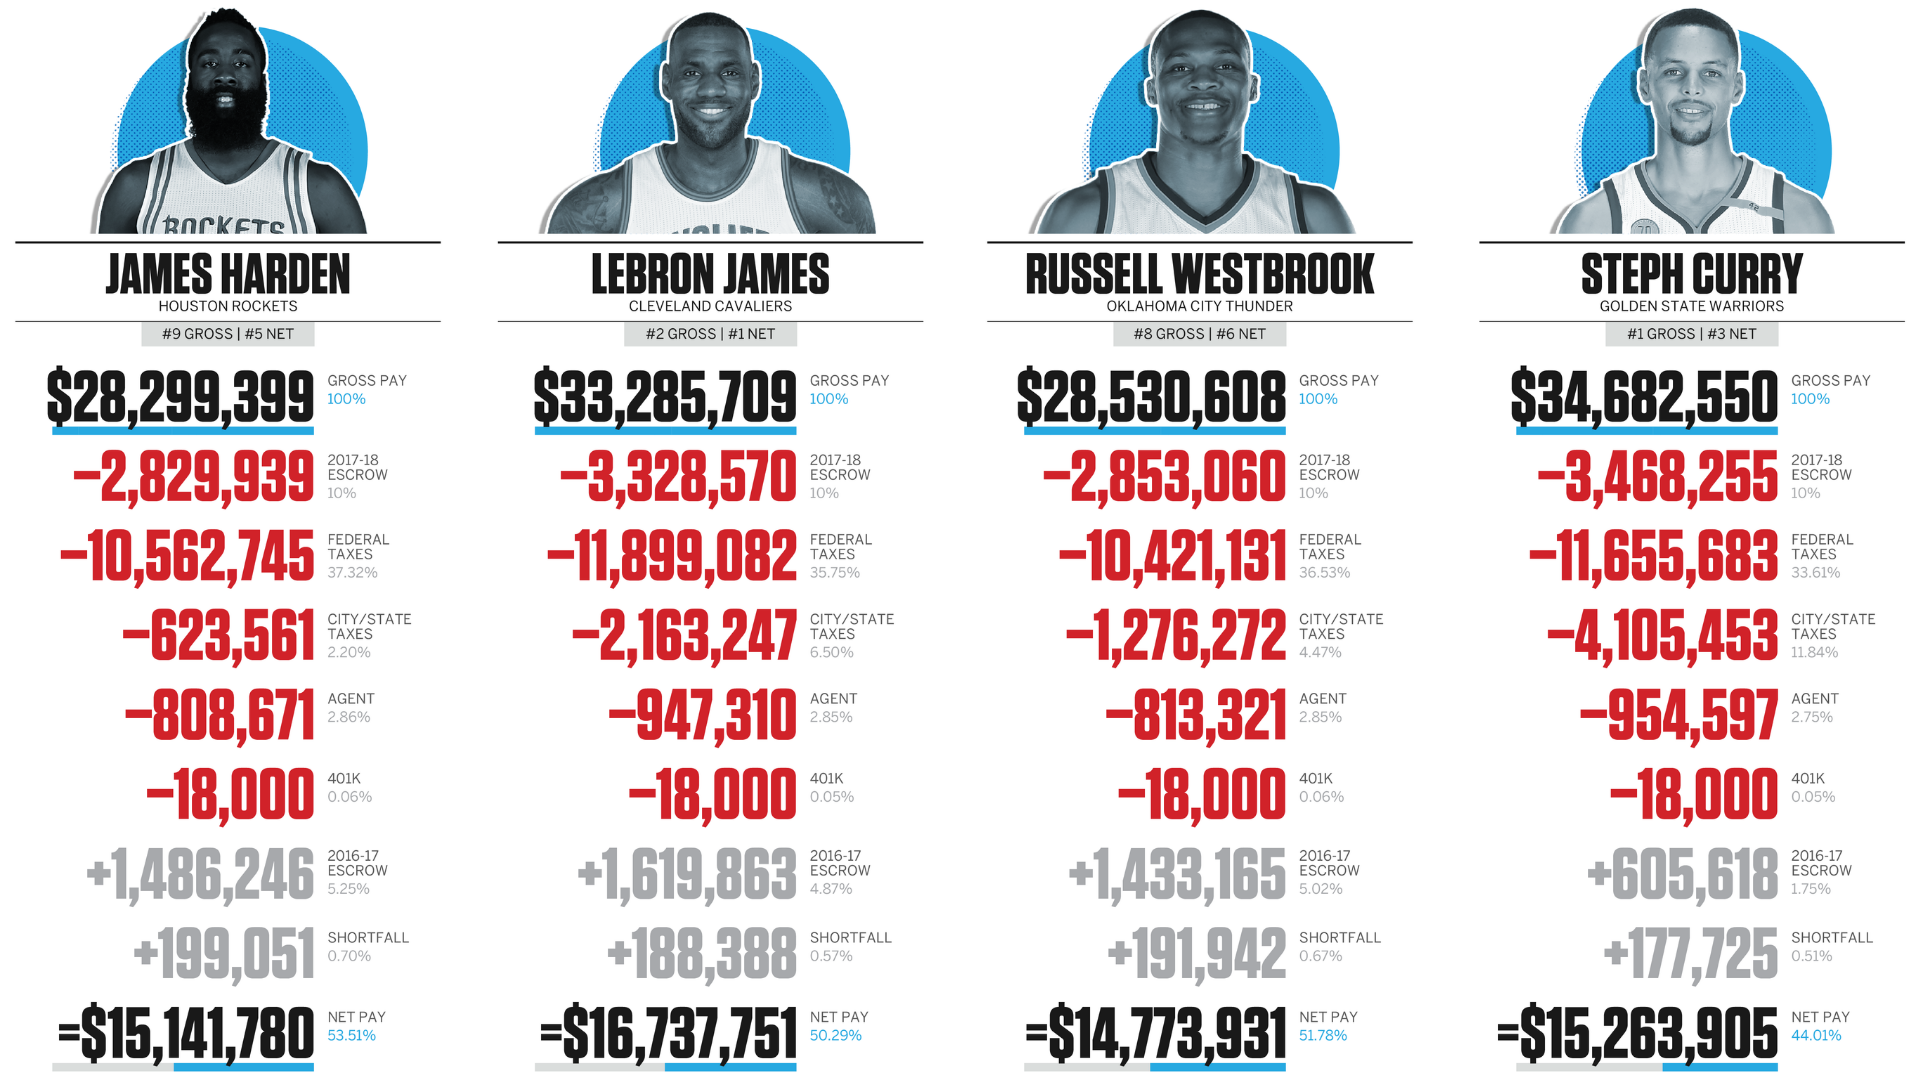 How Much Basketball Players Make a Year?